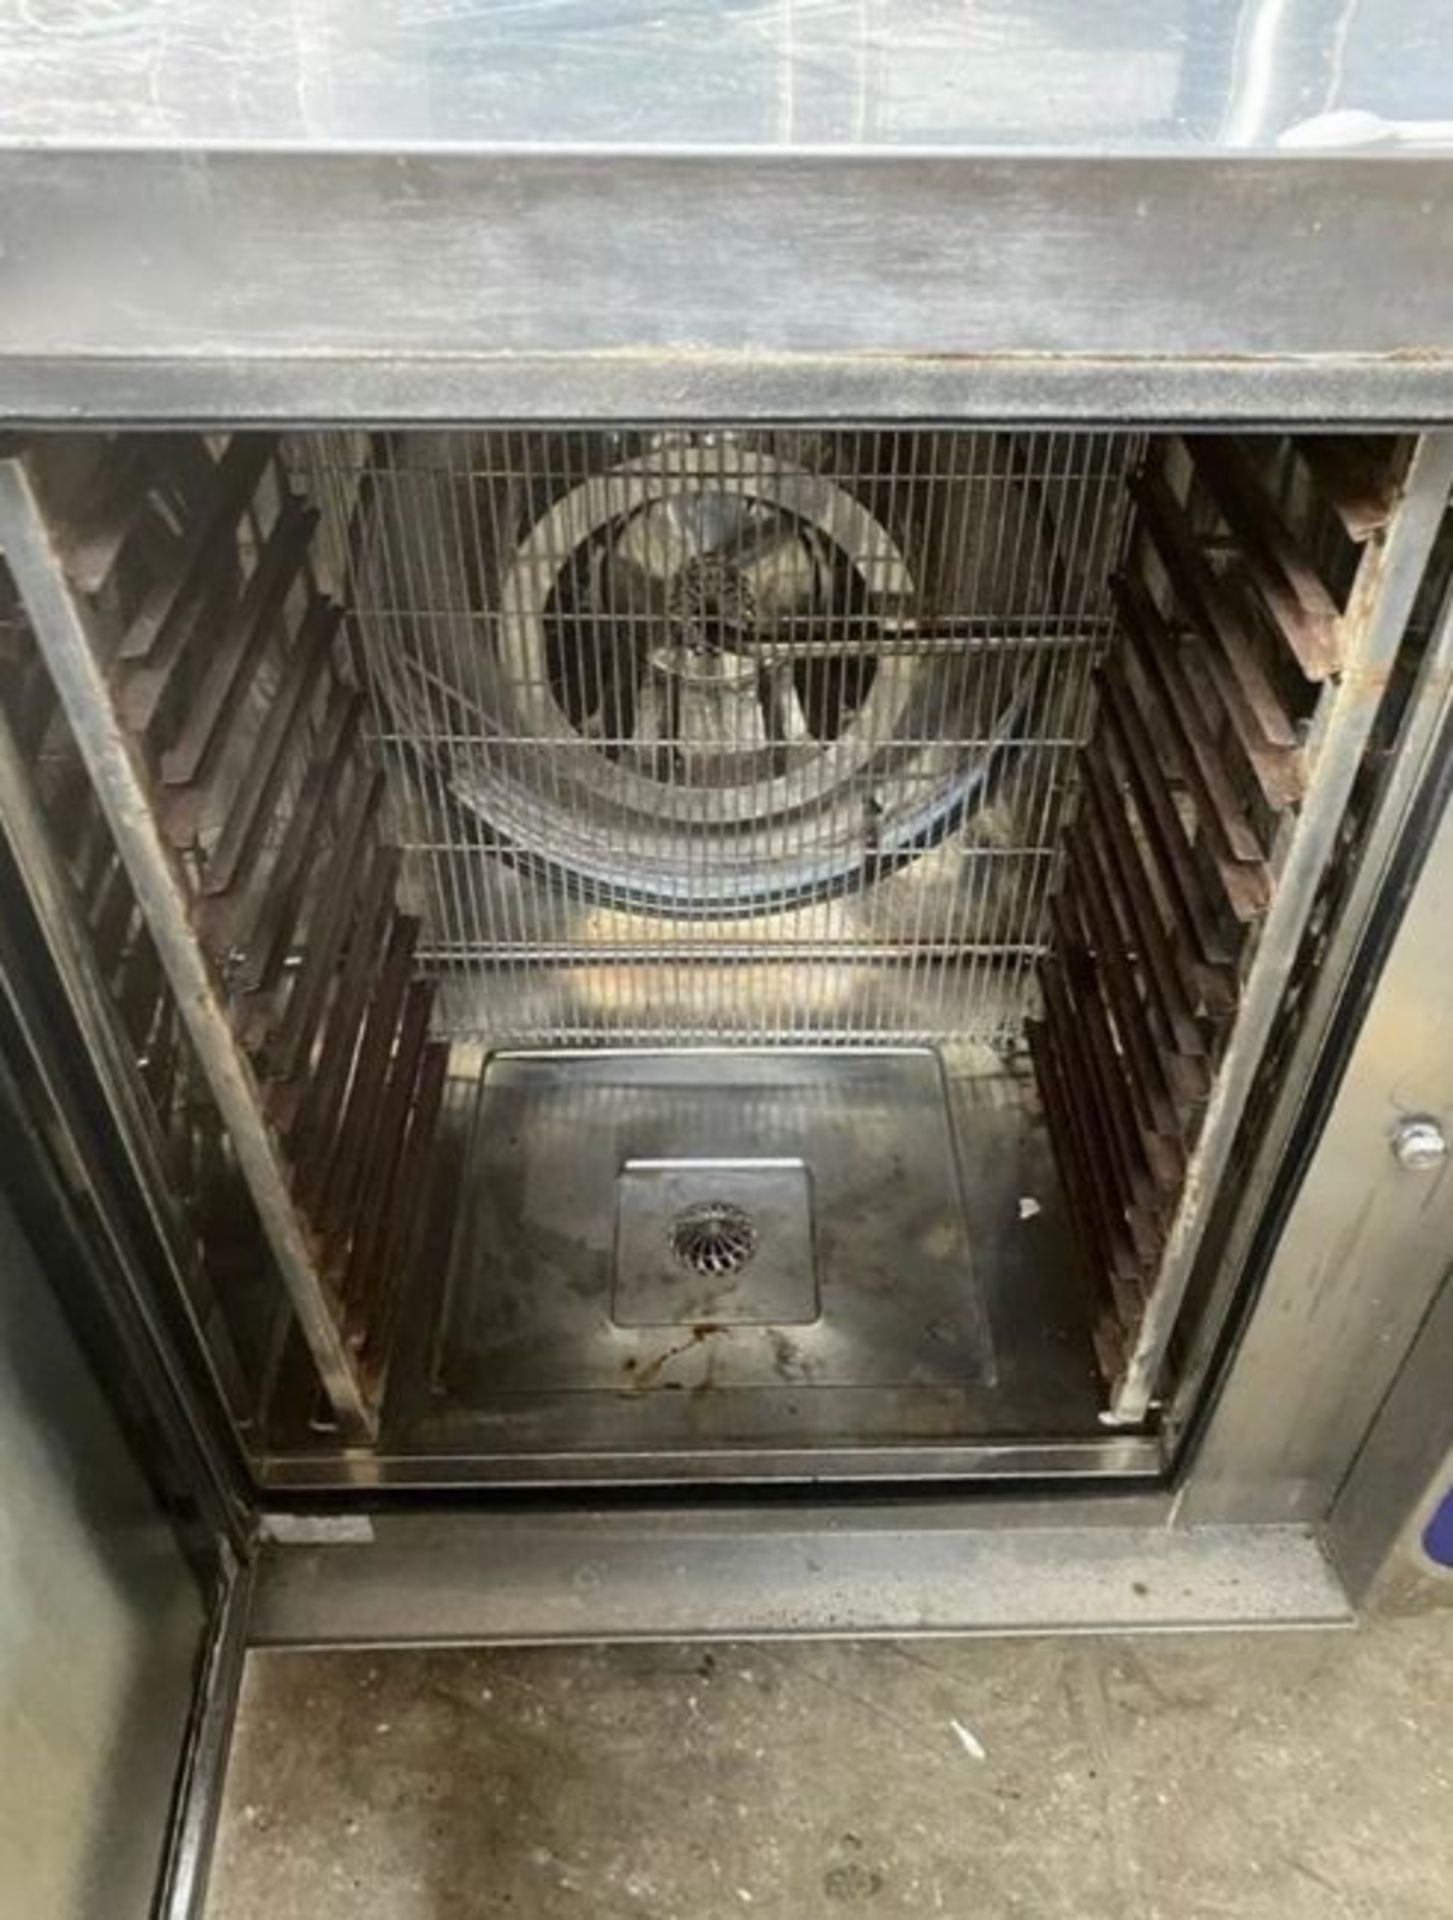 1 x Bonnet 10 Grid Precijet Commercial Combi Oven - 3 Phase - Recently Removed From a 5 Star - Image 3 of 3